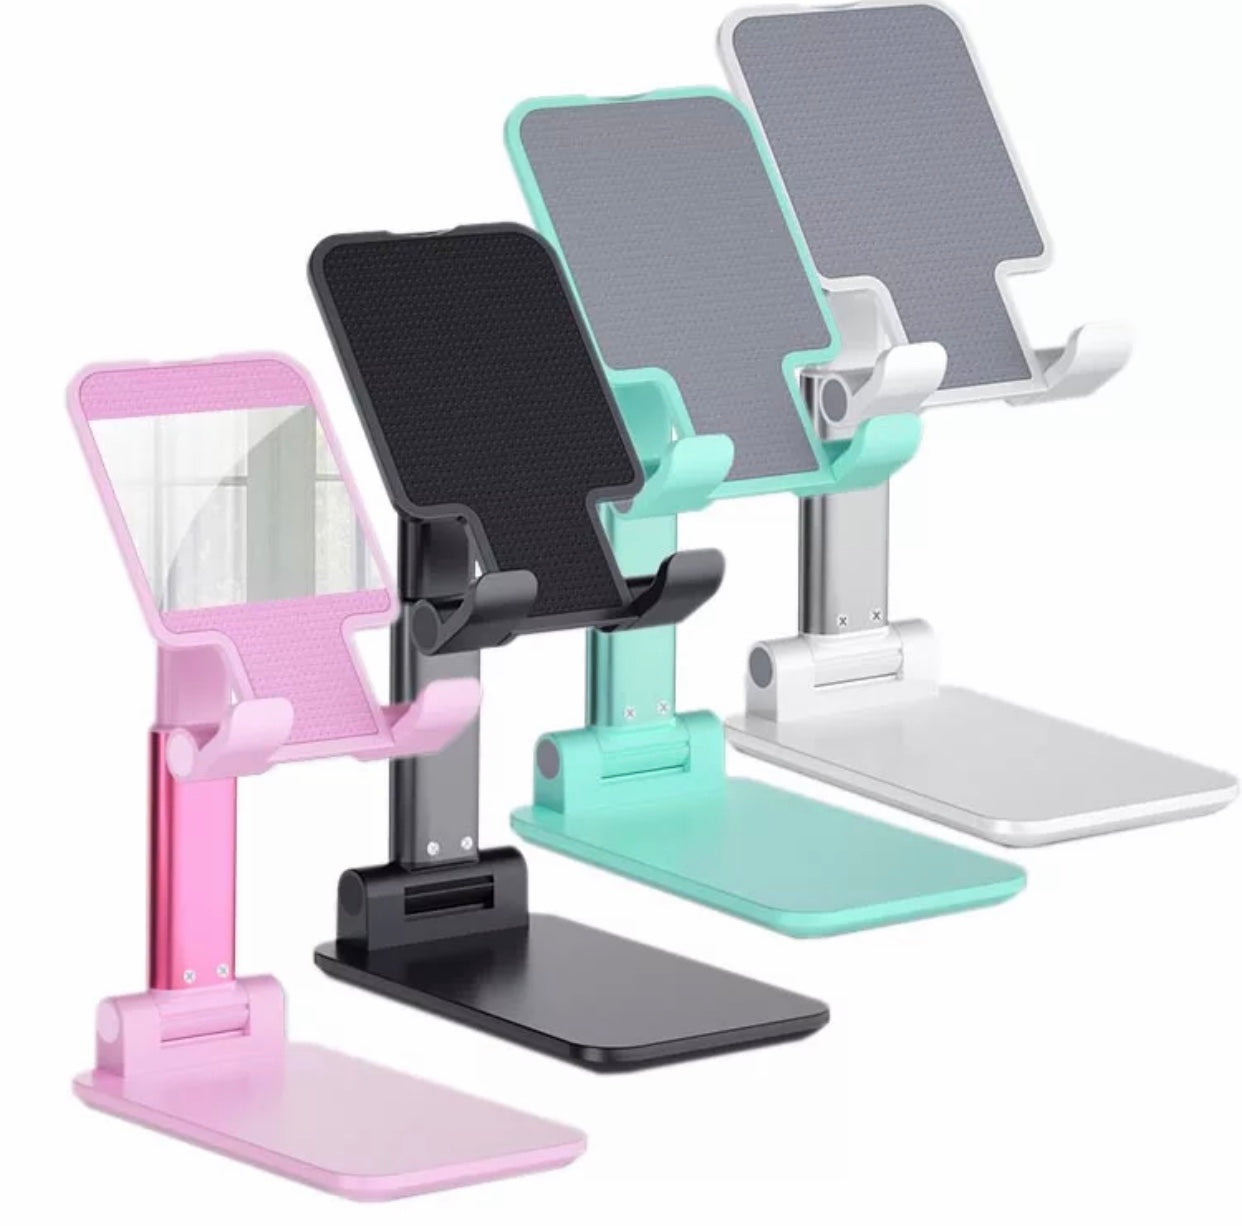 Phone/Tablet Holder Telescopic Cradle with Adjustable Base - (4 color options). Order more. Get more!